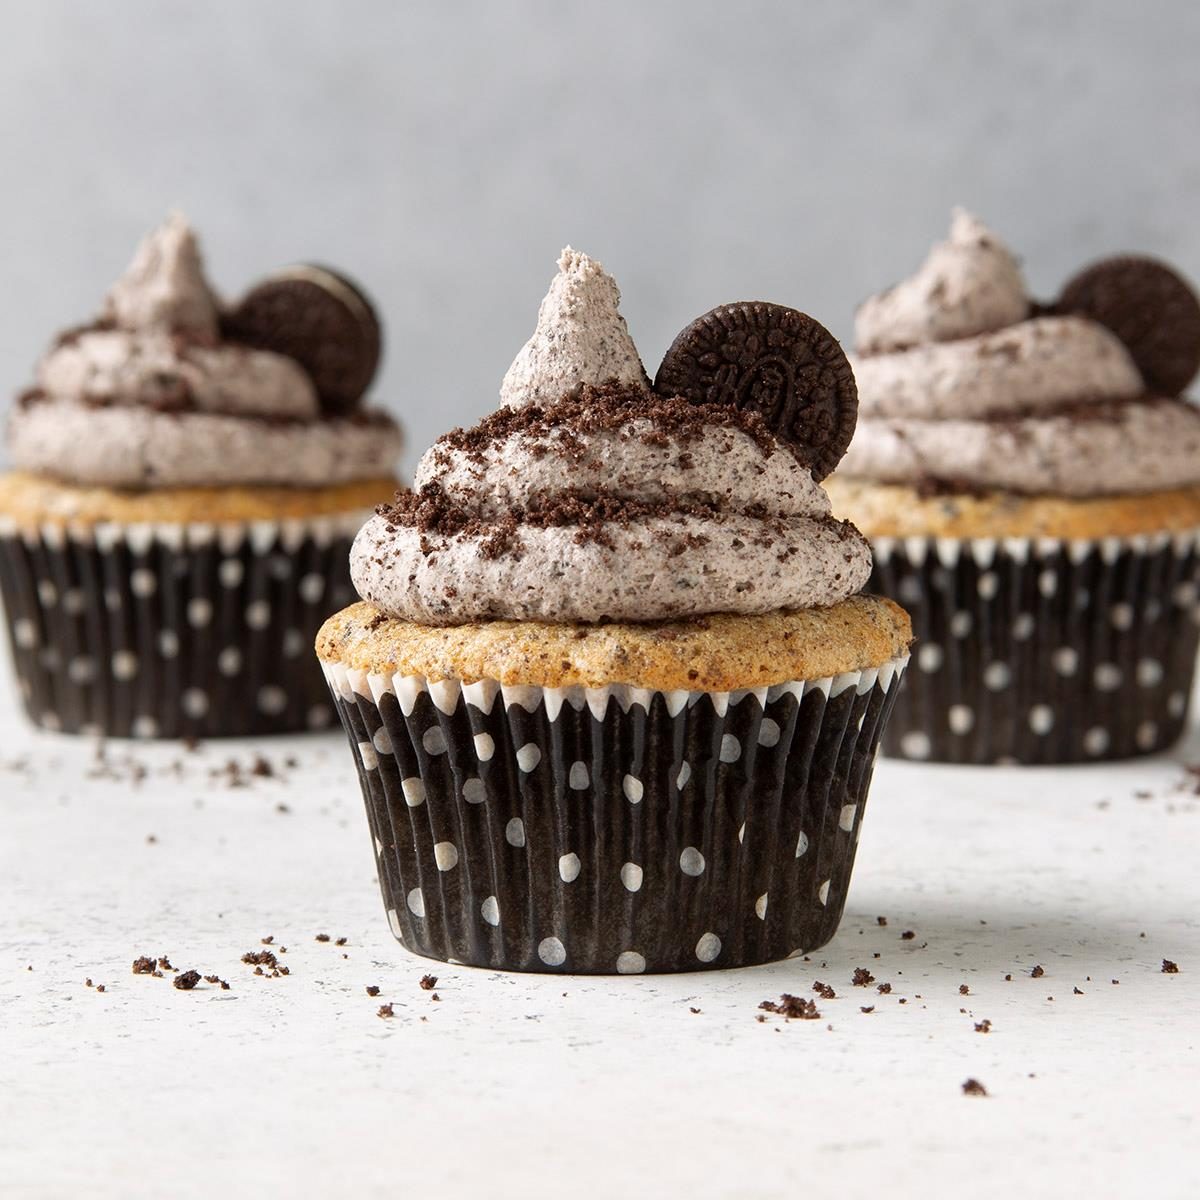 Oreo Cupcakes With Cookies And Cream Frosting Exps Ft19 247265 F 1203 1 5